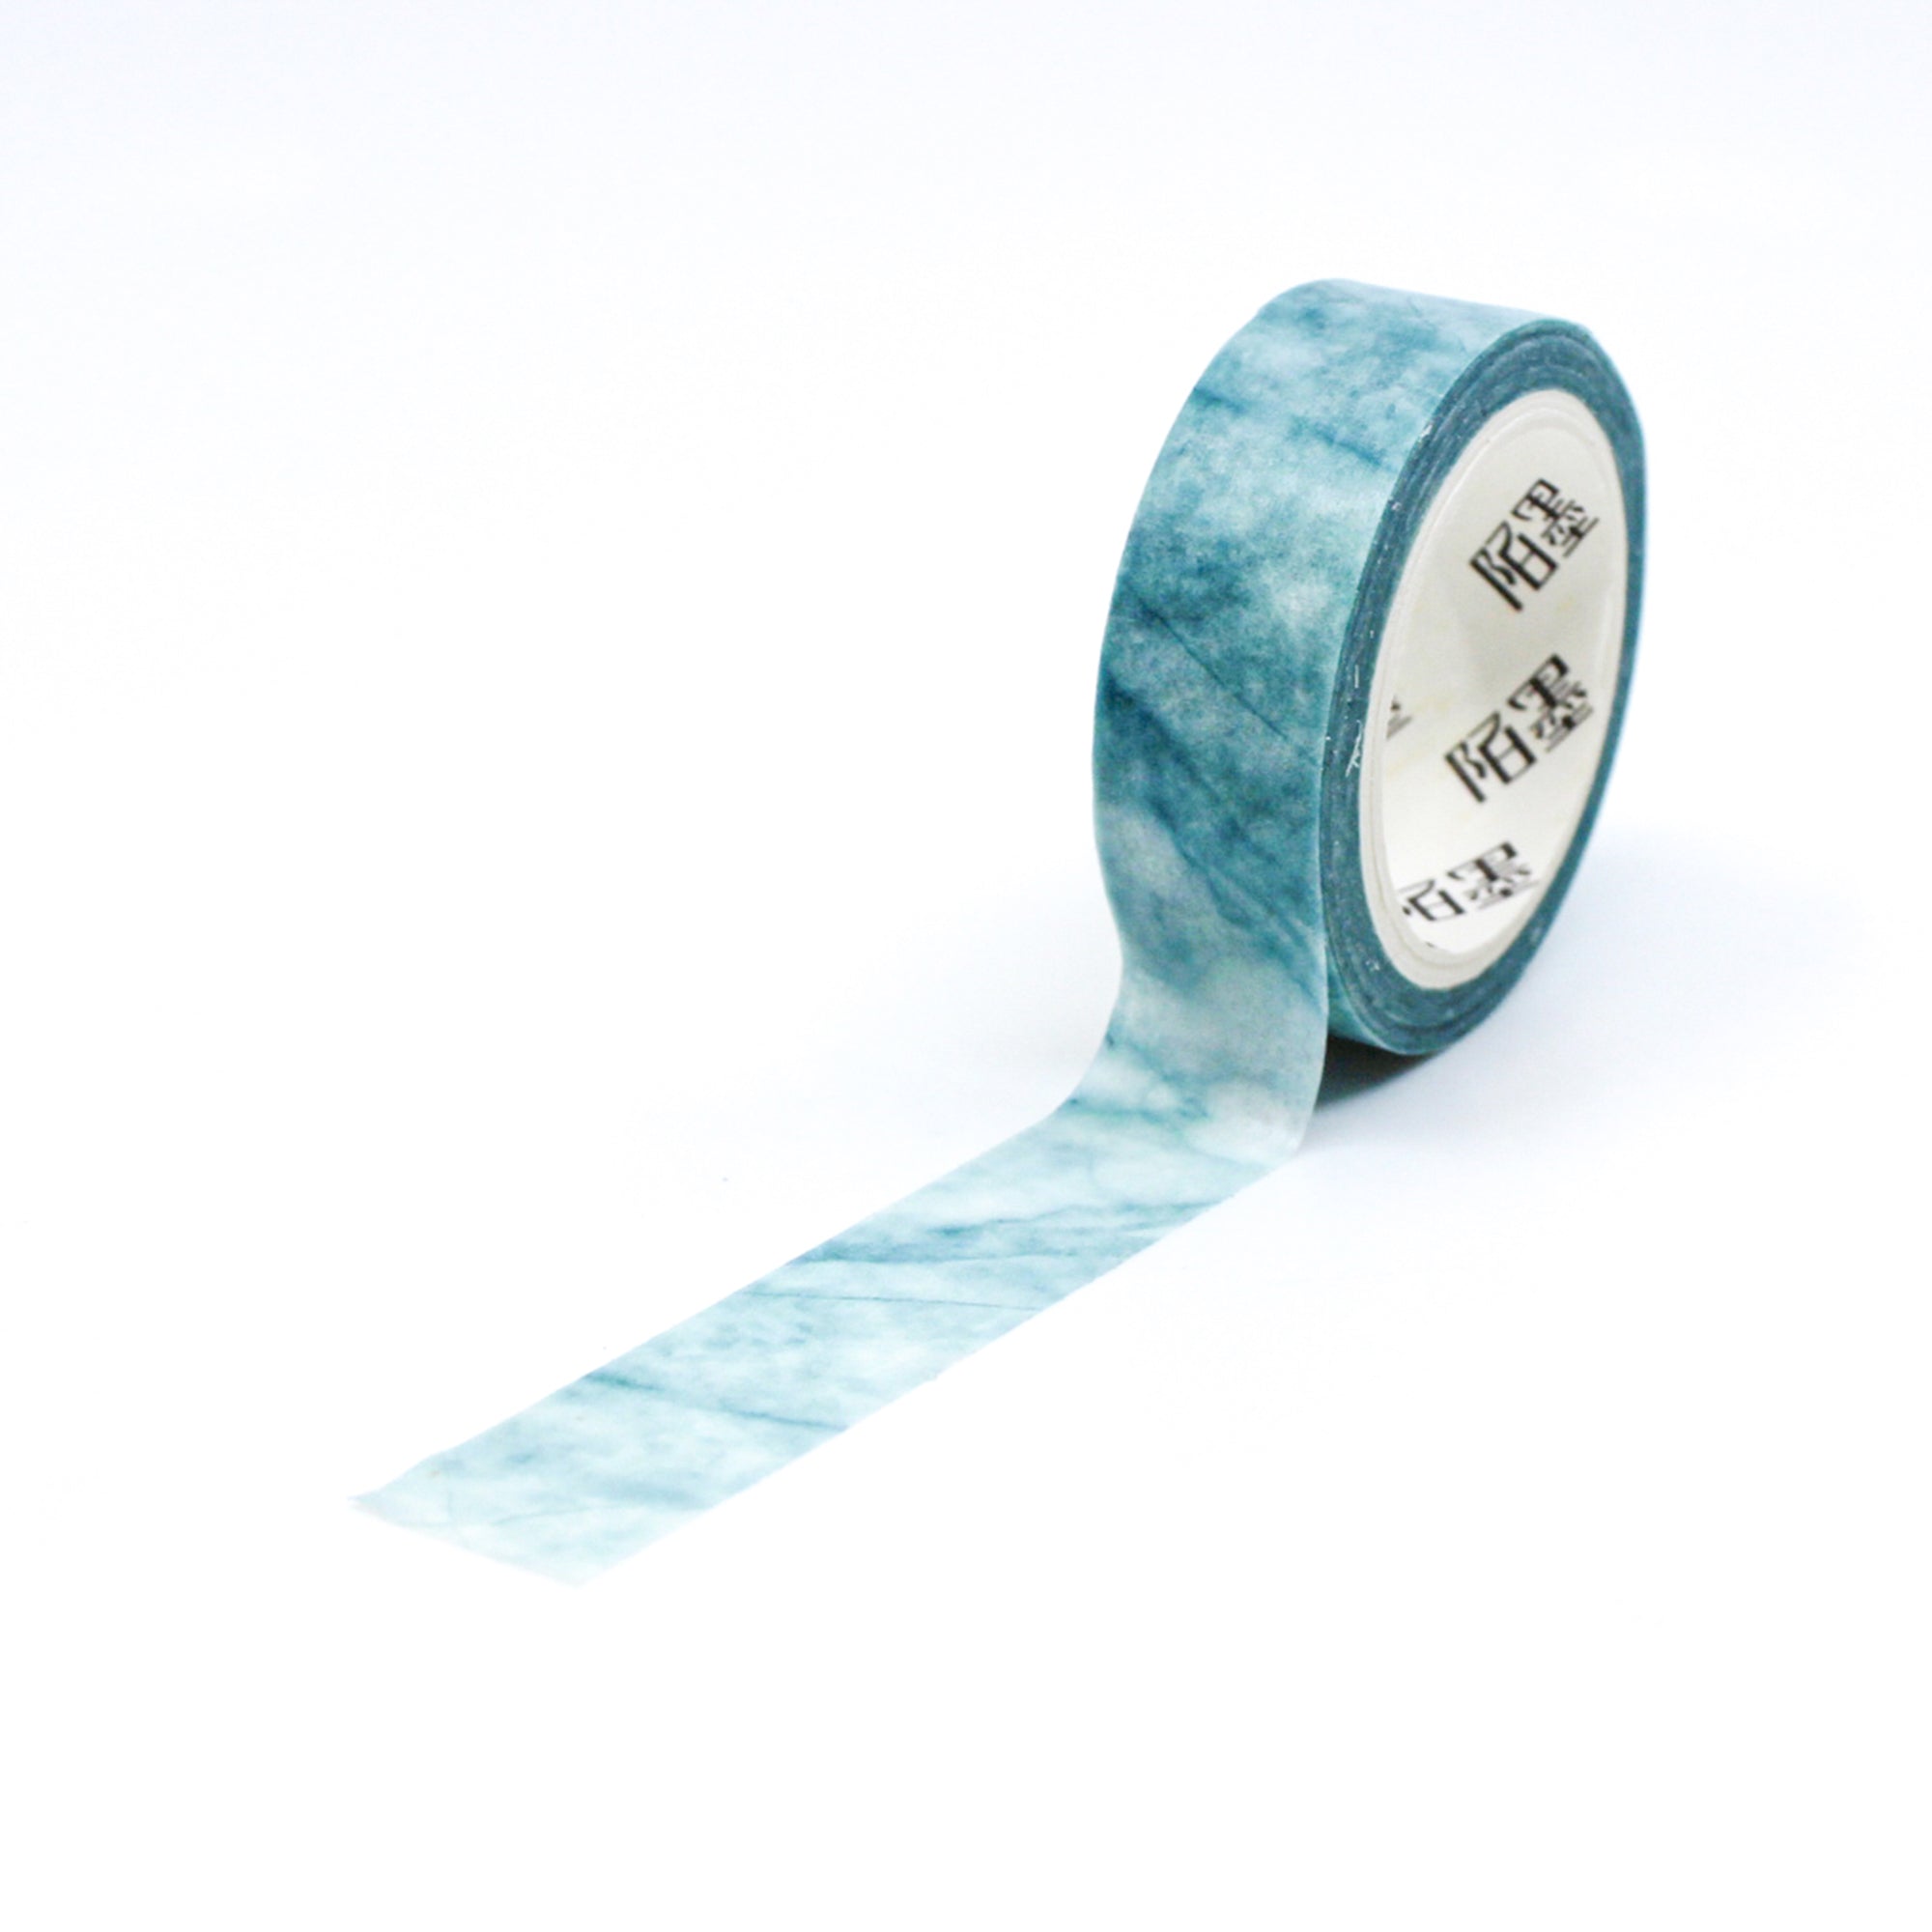 This green crystal mountain watercolor washi tape is the perfect addition to your washi collection. The simplicity of the pattern is perfect for accenting and matching any project's theme while adding a beautiful and interesting pattern. This tape is sold at BBB Supplies Craft Shop